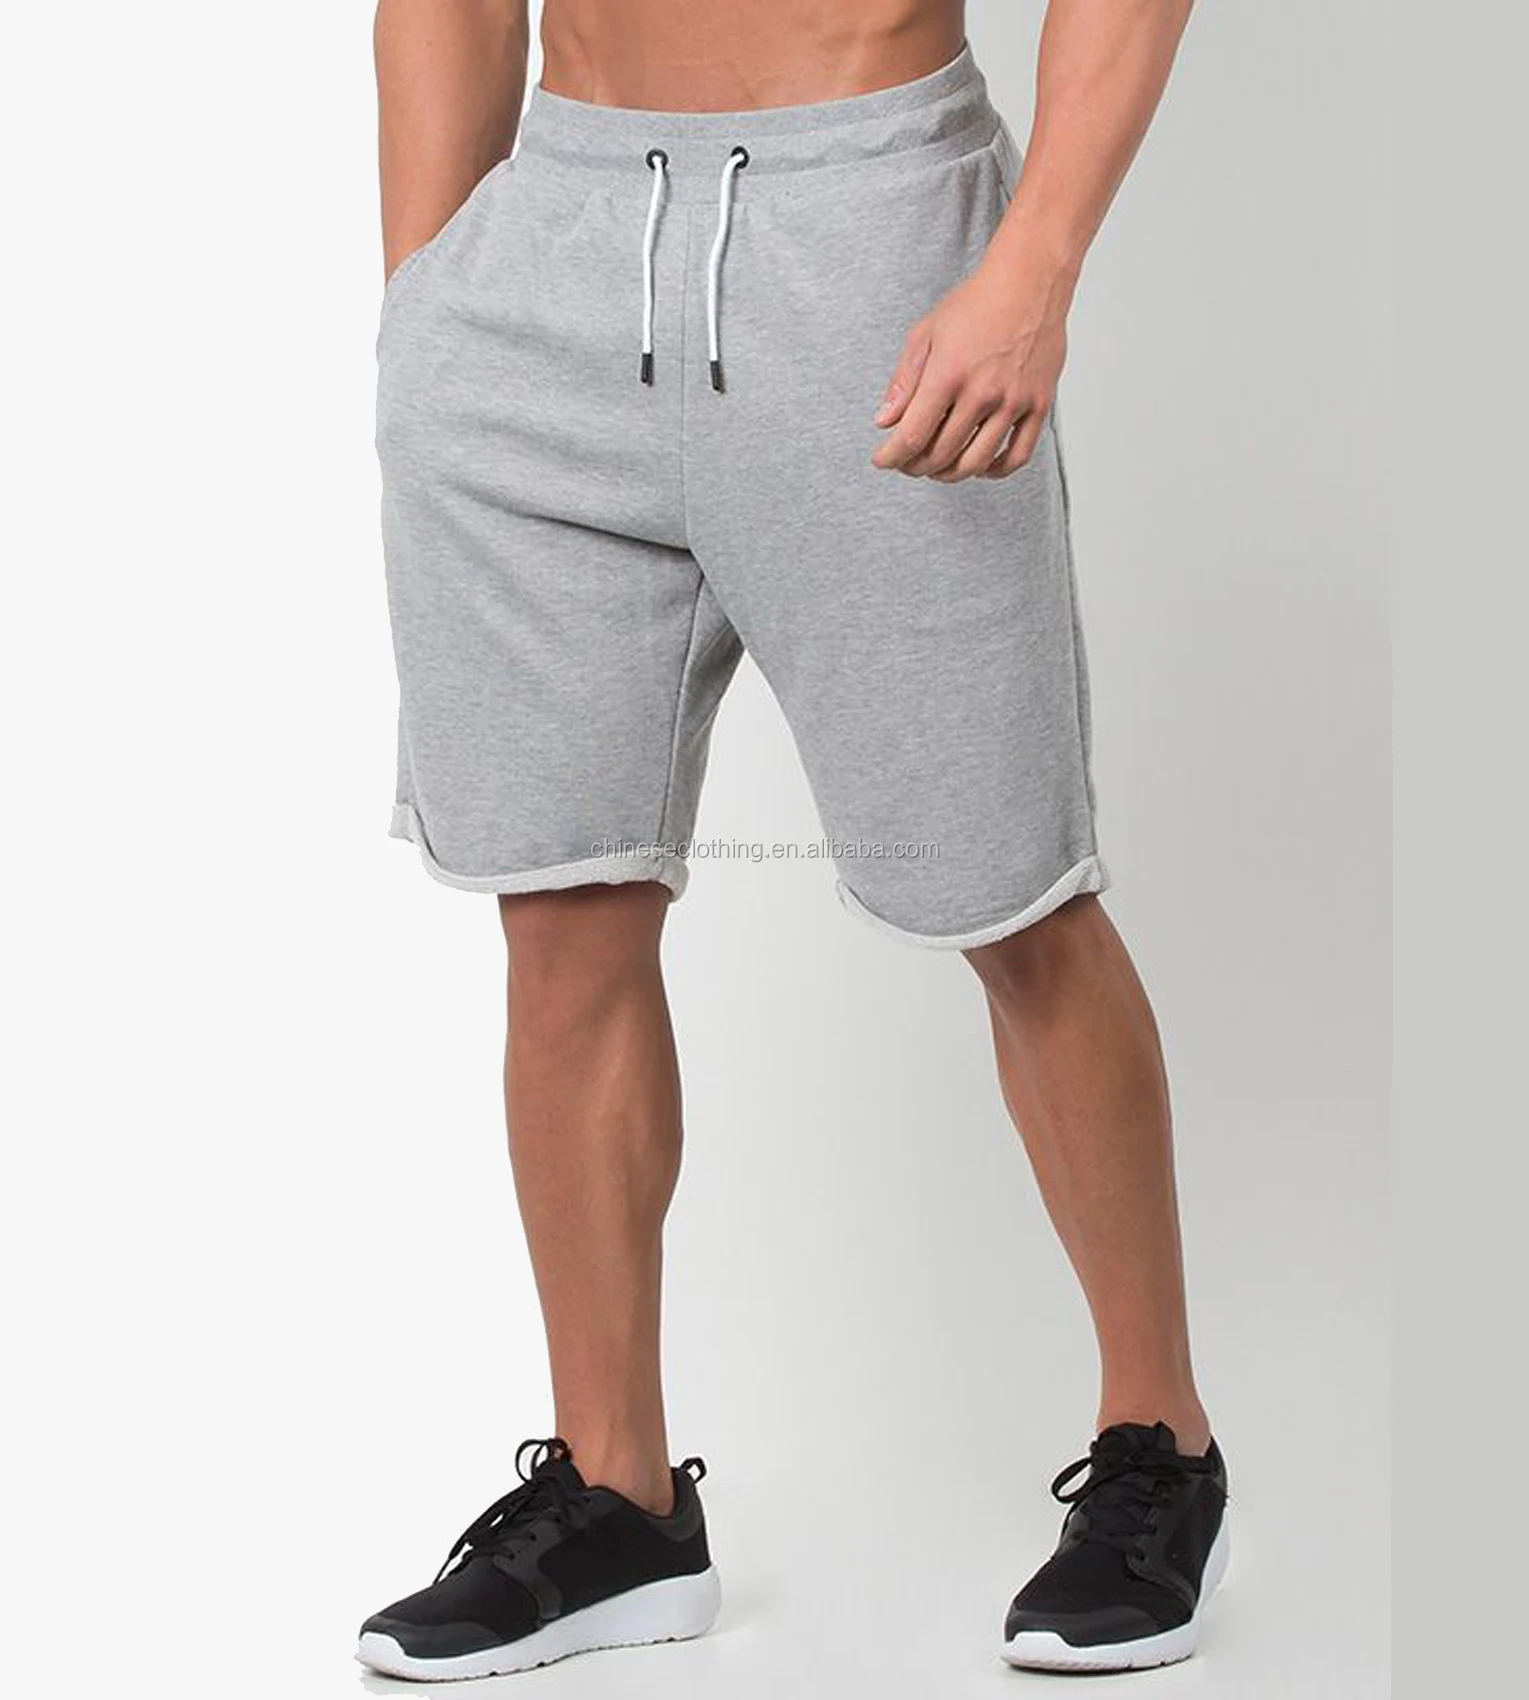 2018 Best Sale Cotton Spandex Fashion Mens Shorts For Gym Clothing ...